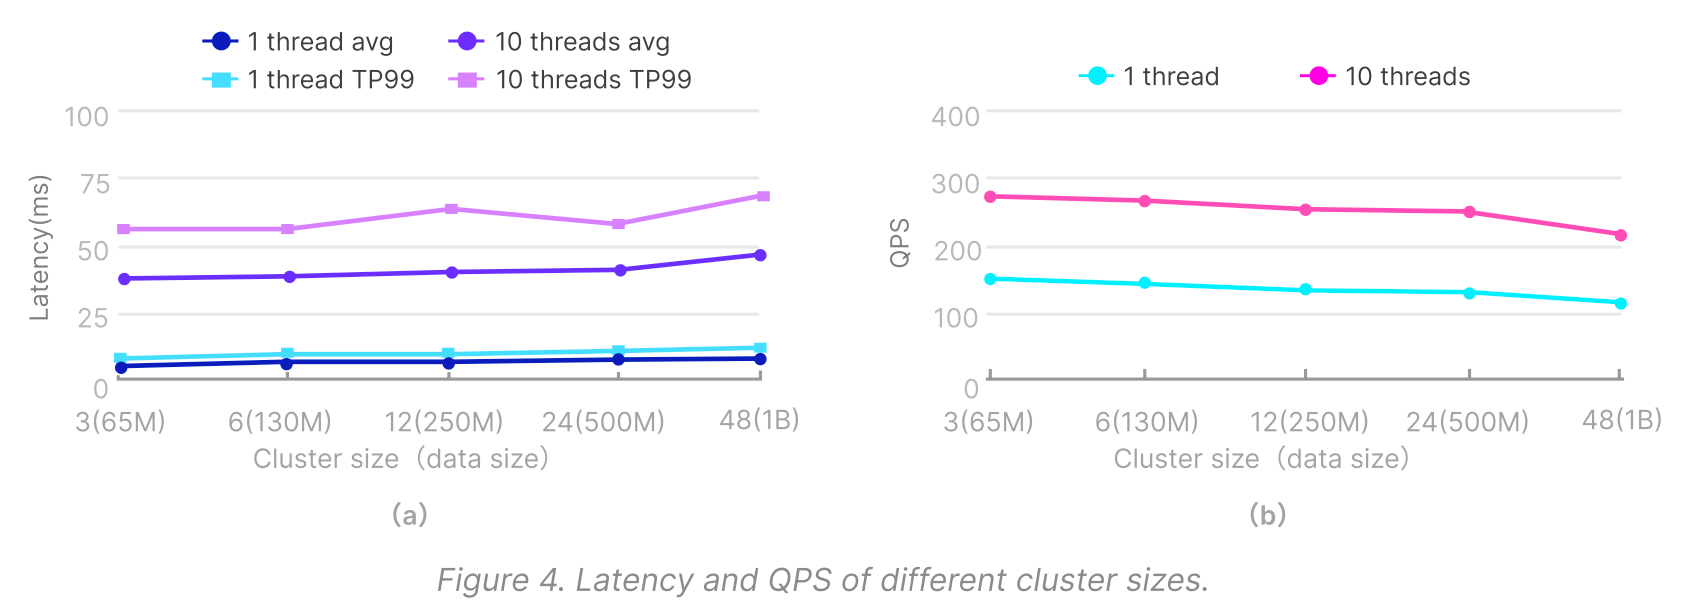 Latency and QPS of differnt cluster sizes | Milvus.png